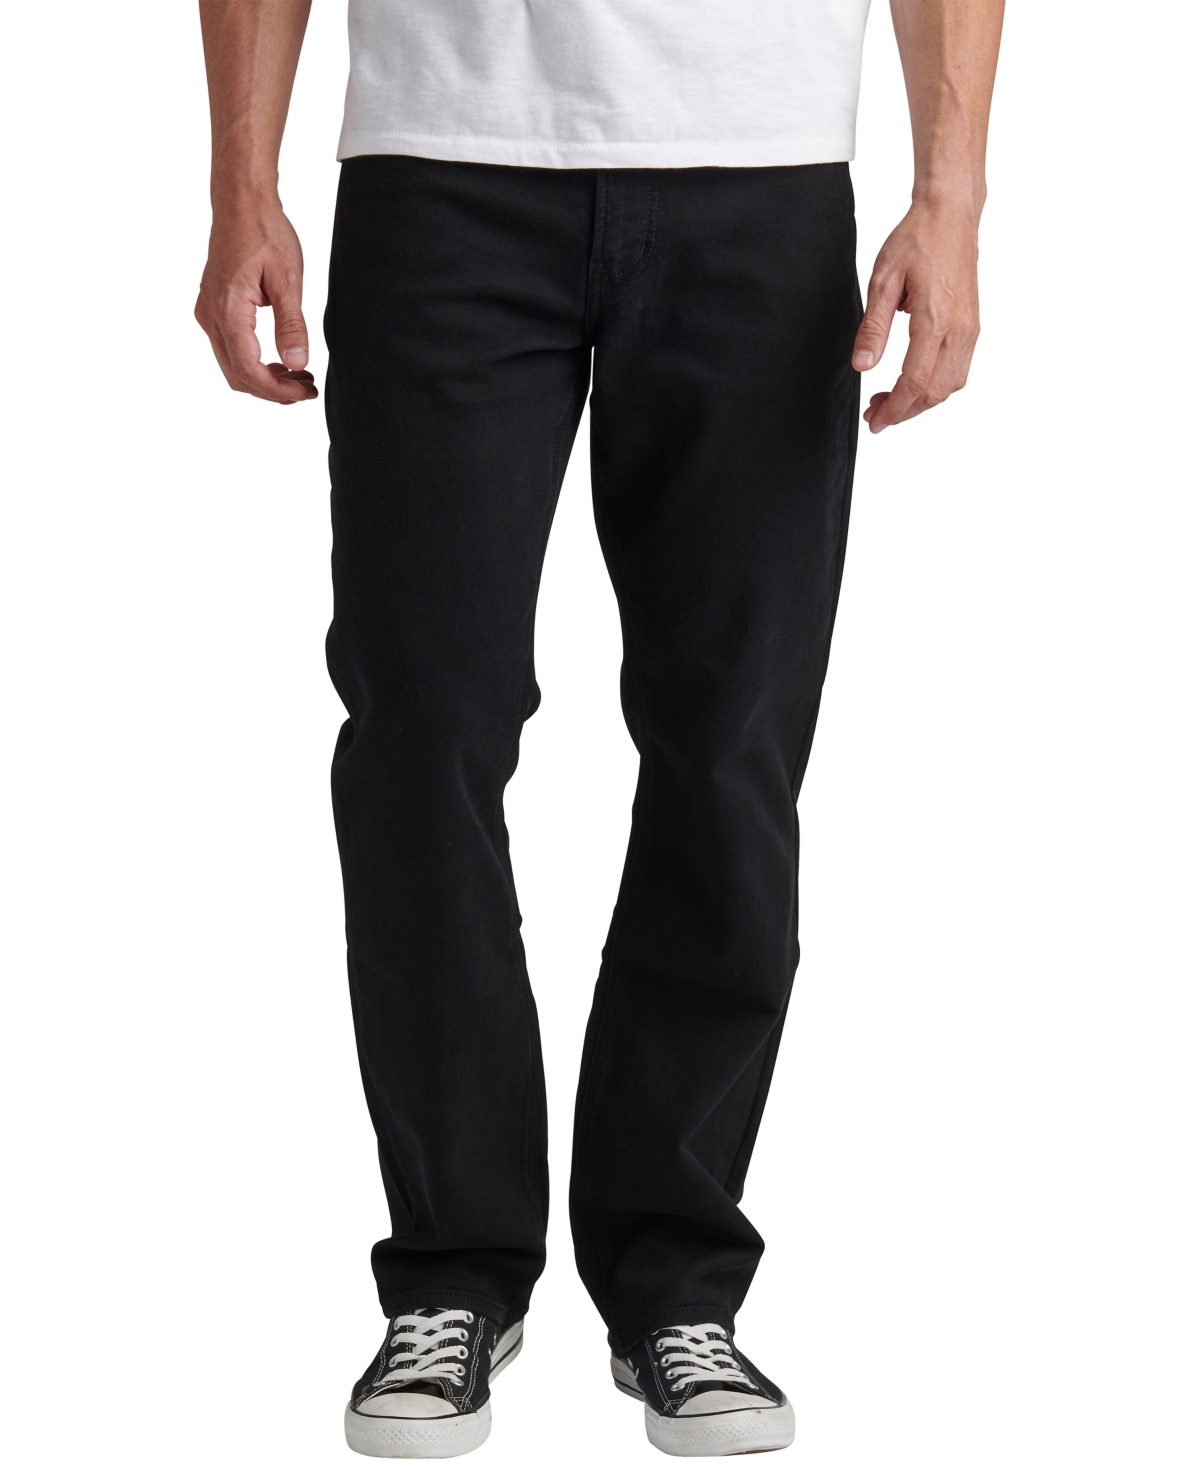 Silver Jeans Co. Men's Authentic The Athletic Denim Jeans In Black